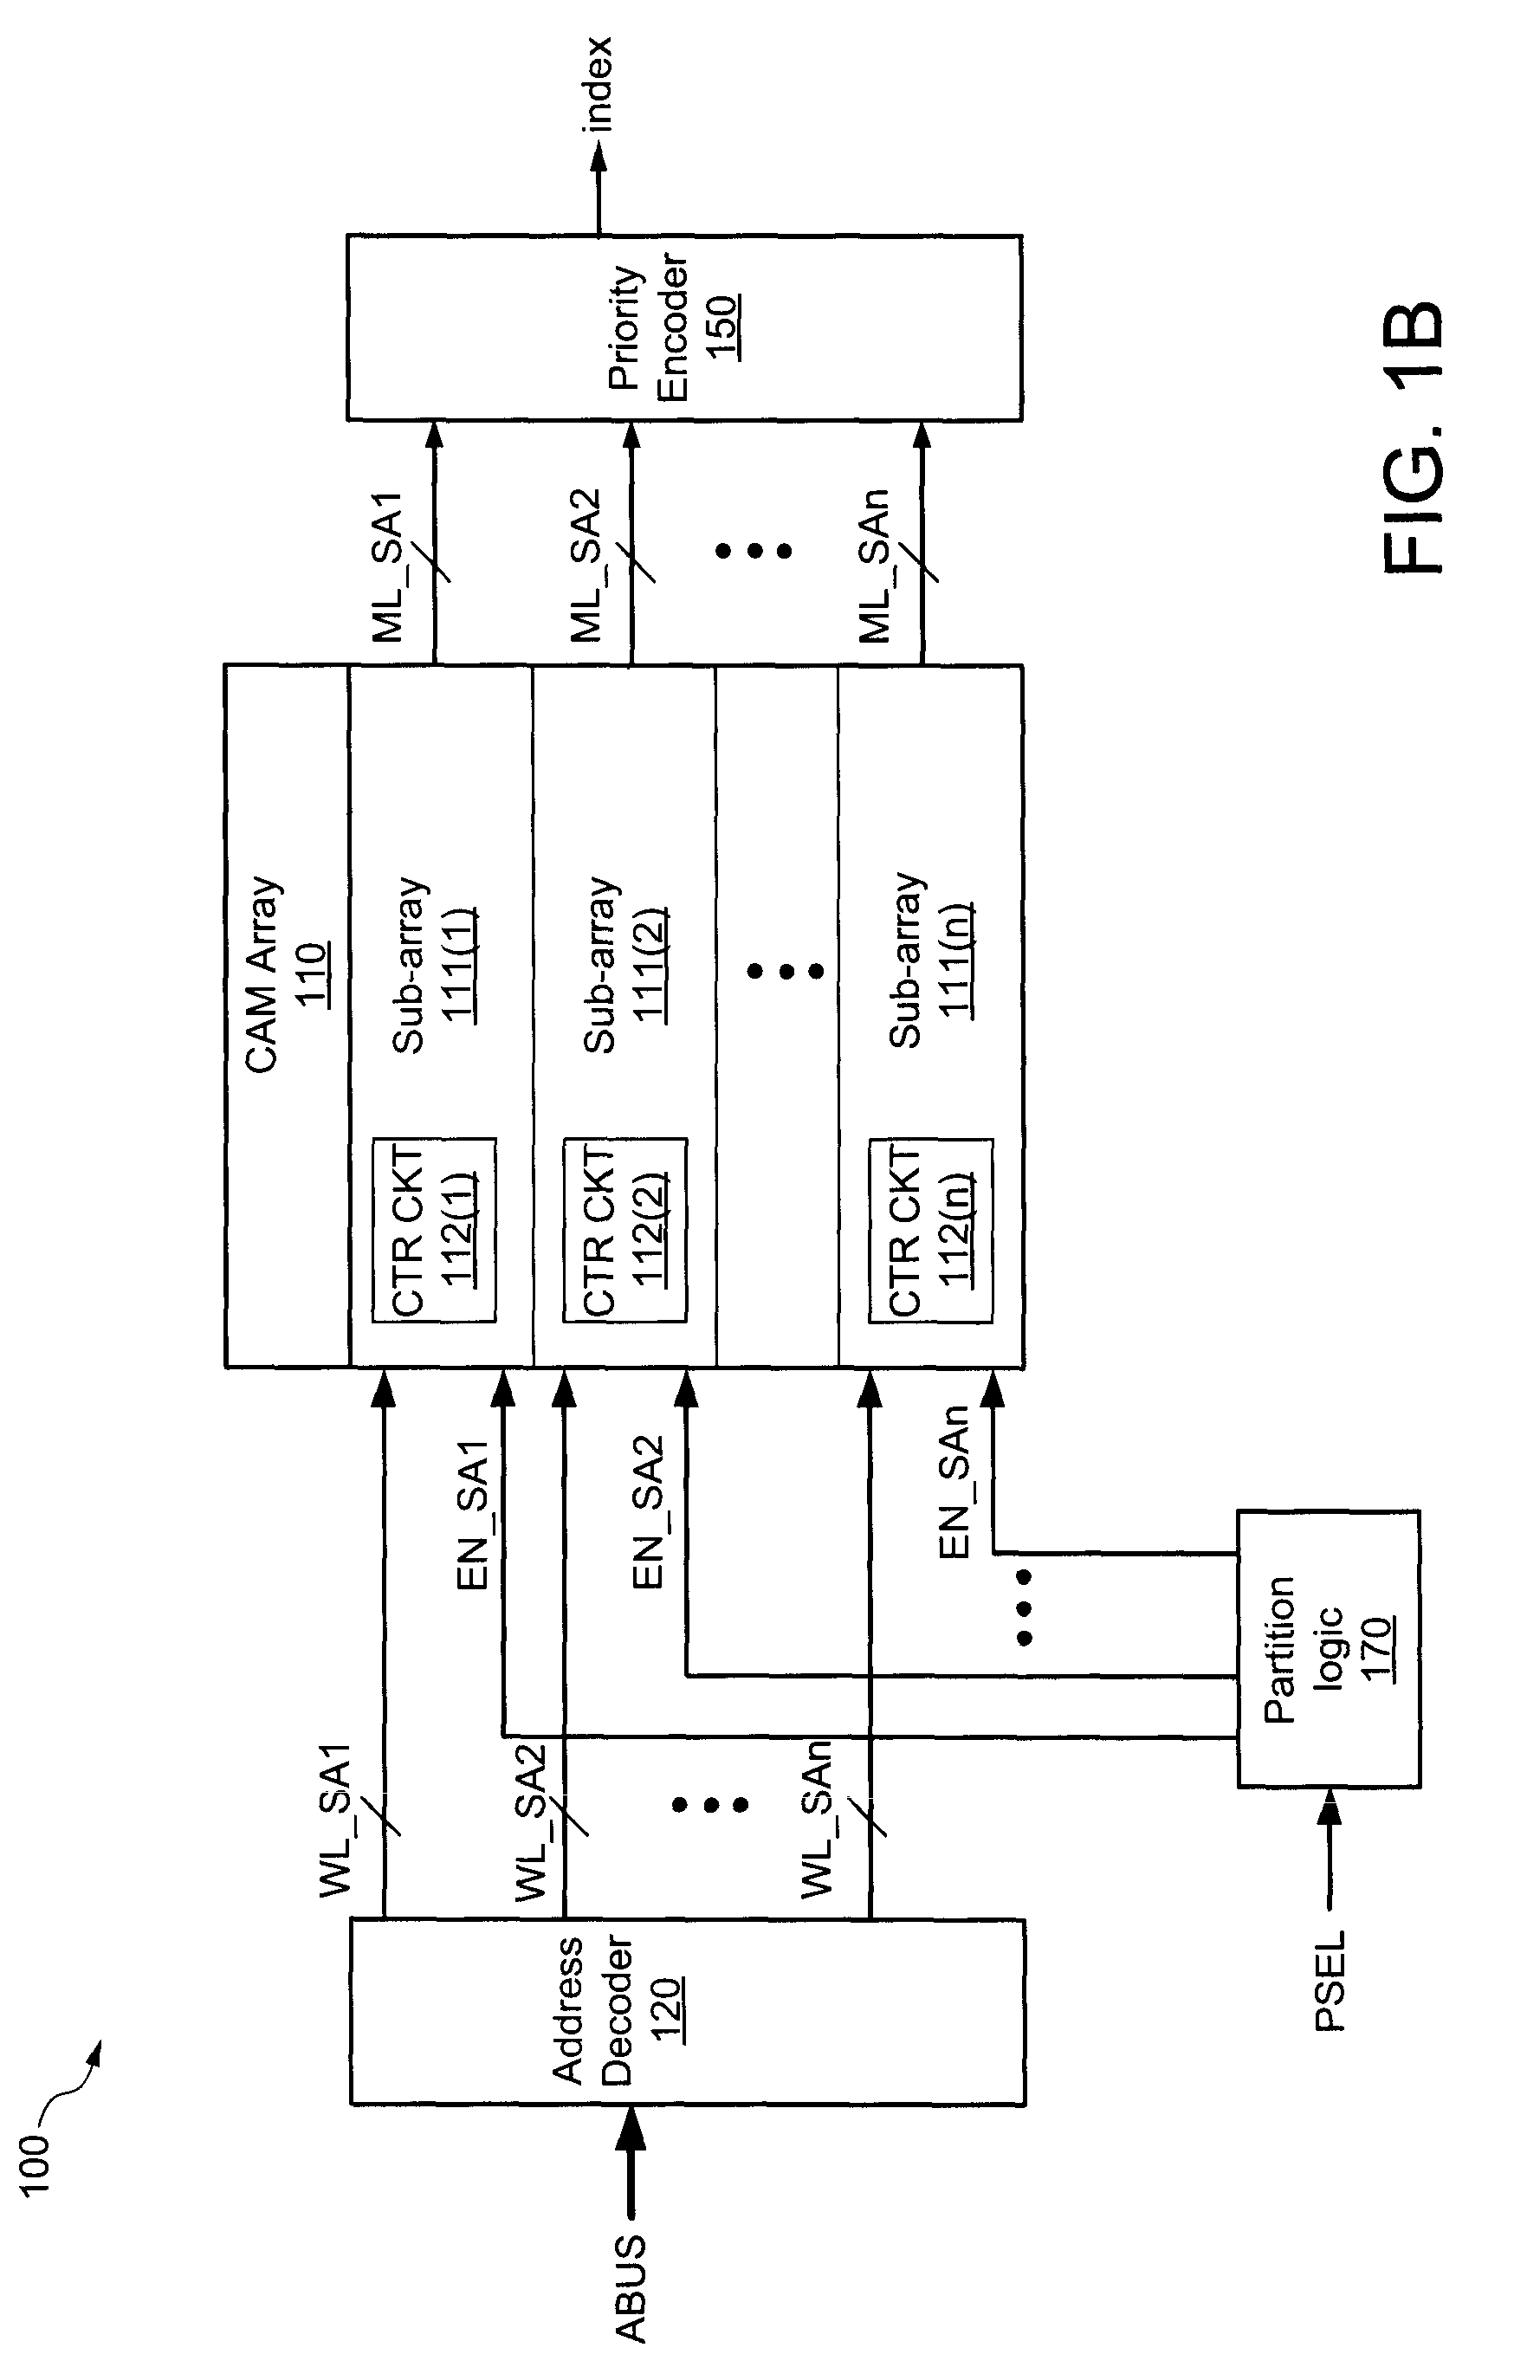 Dynamically partitioned CAM array